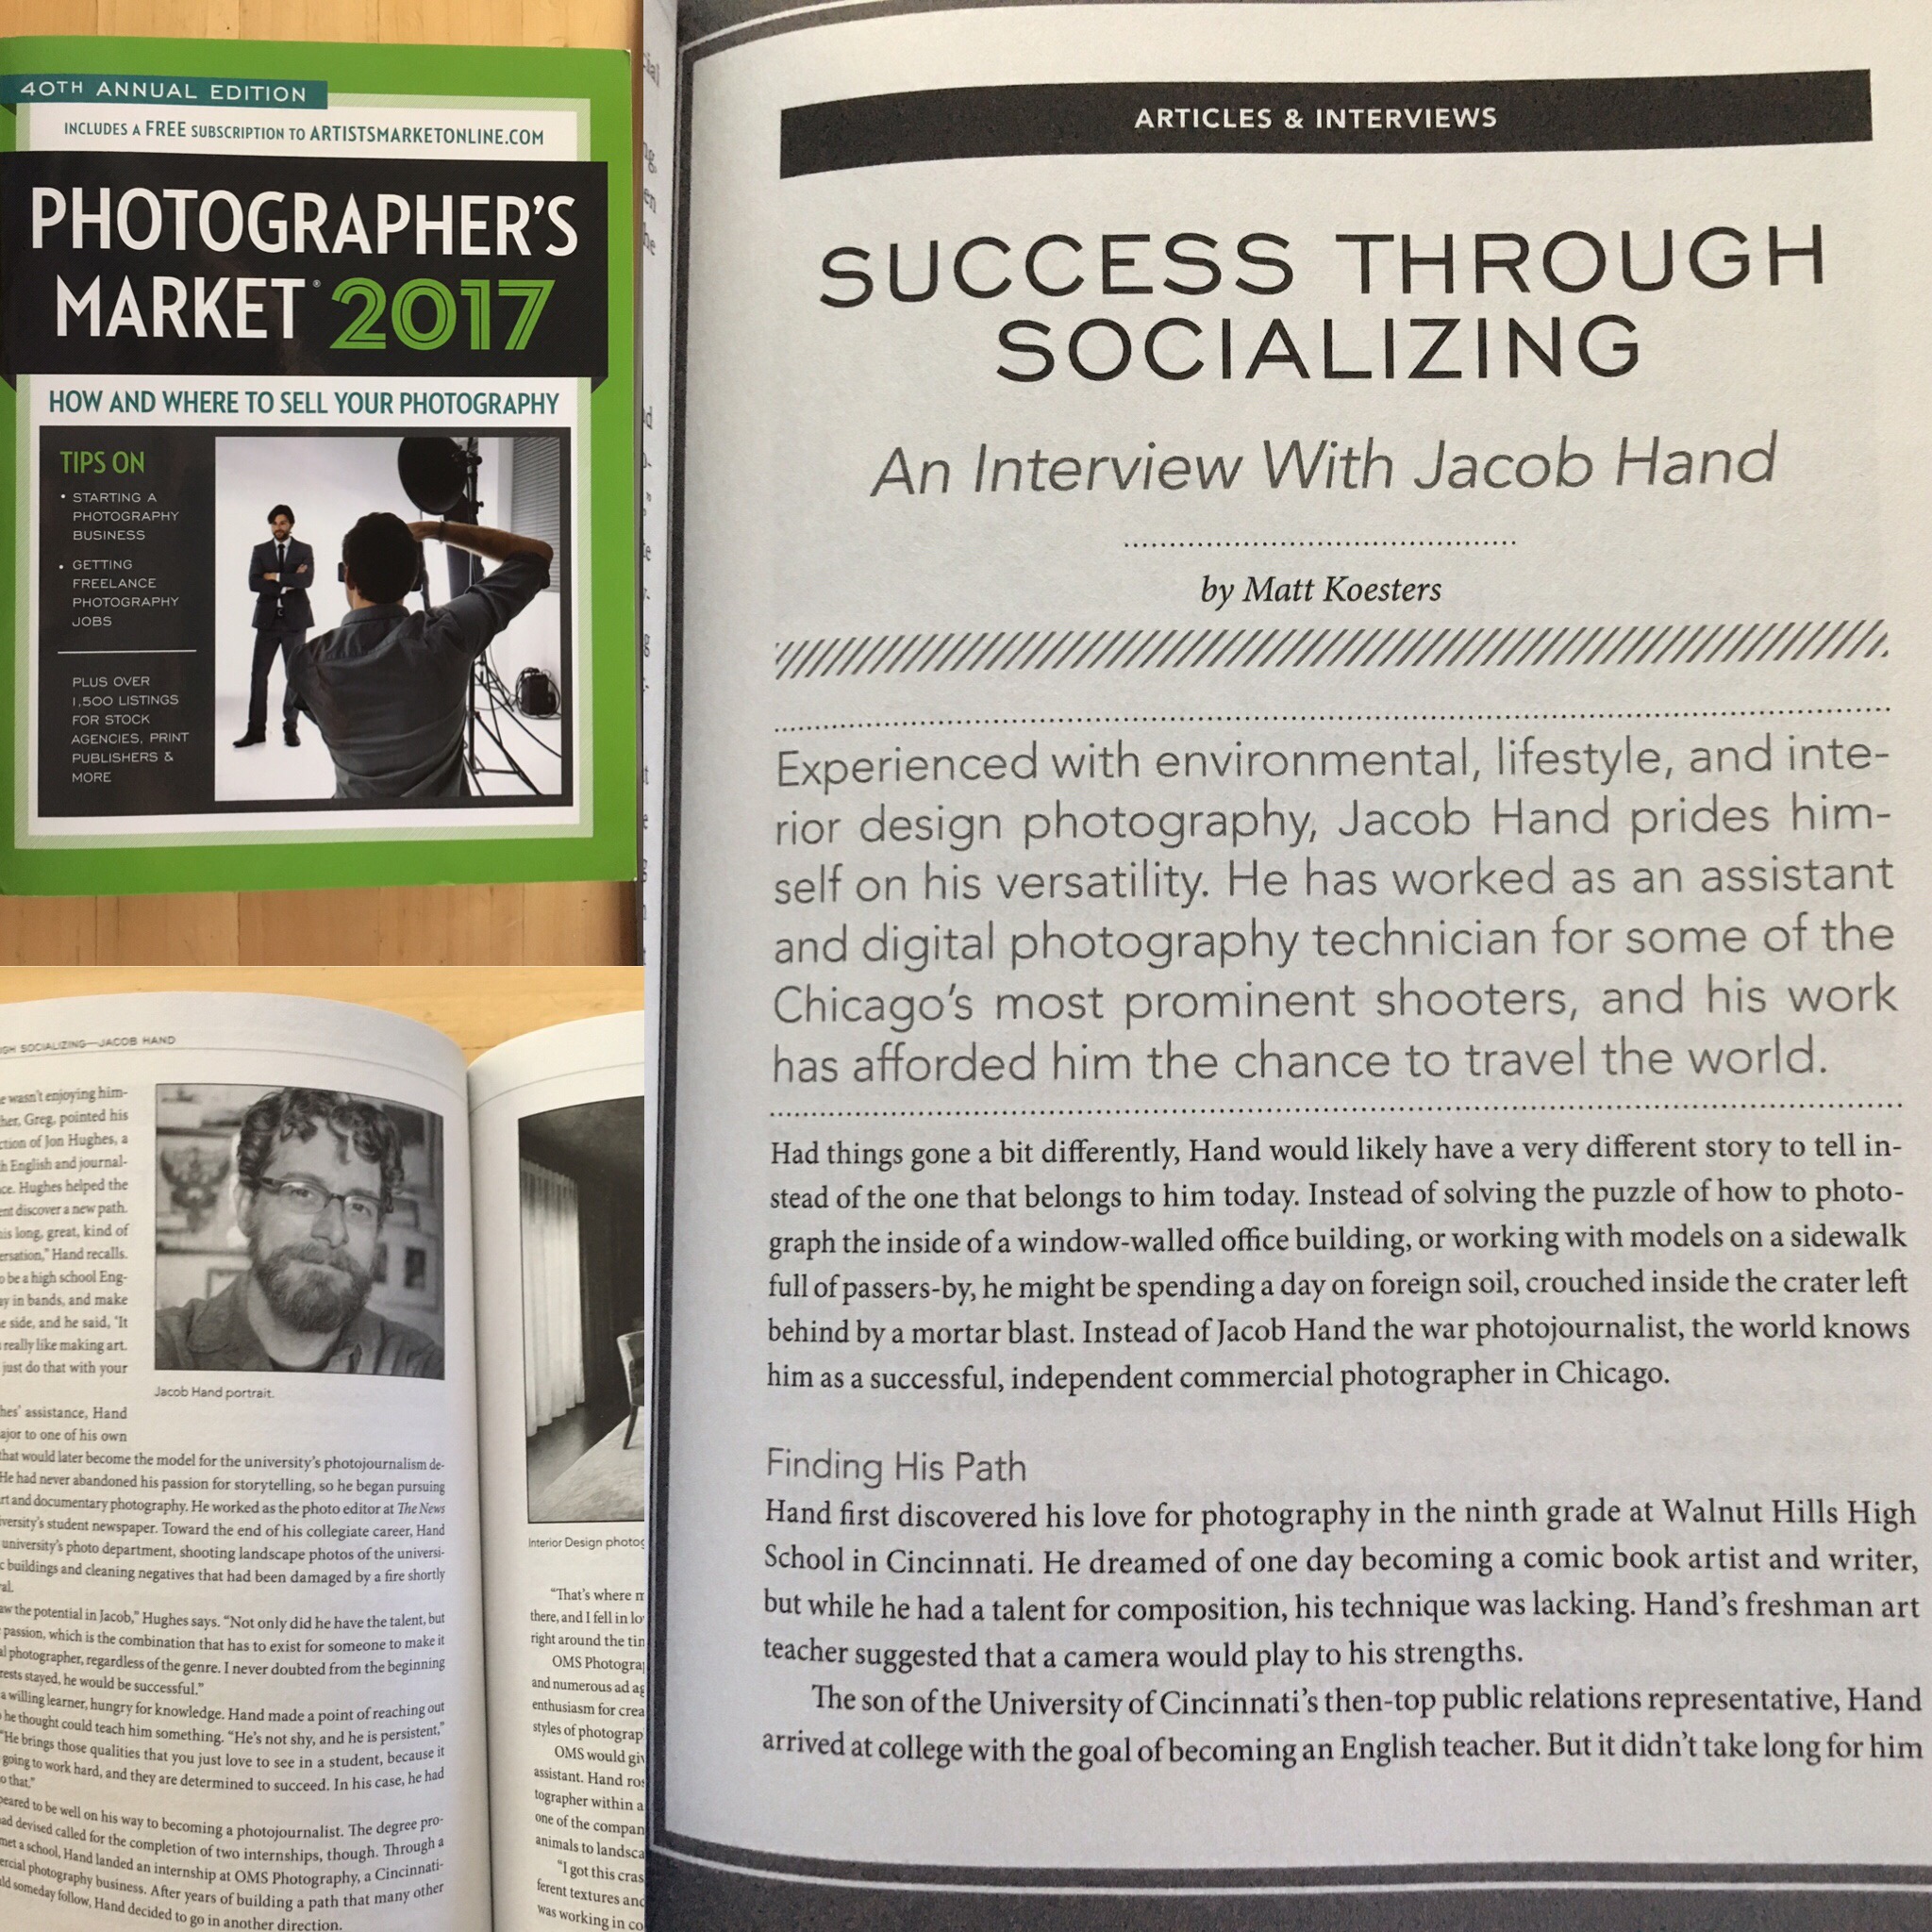 Jacob Hand is featured in Photographer’s Market 2017